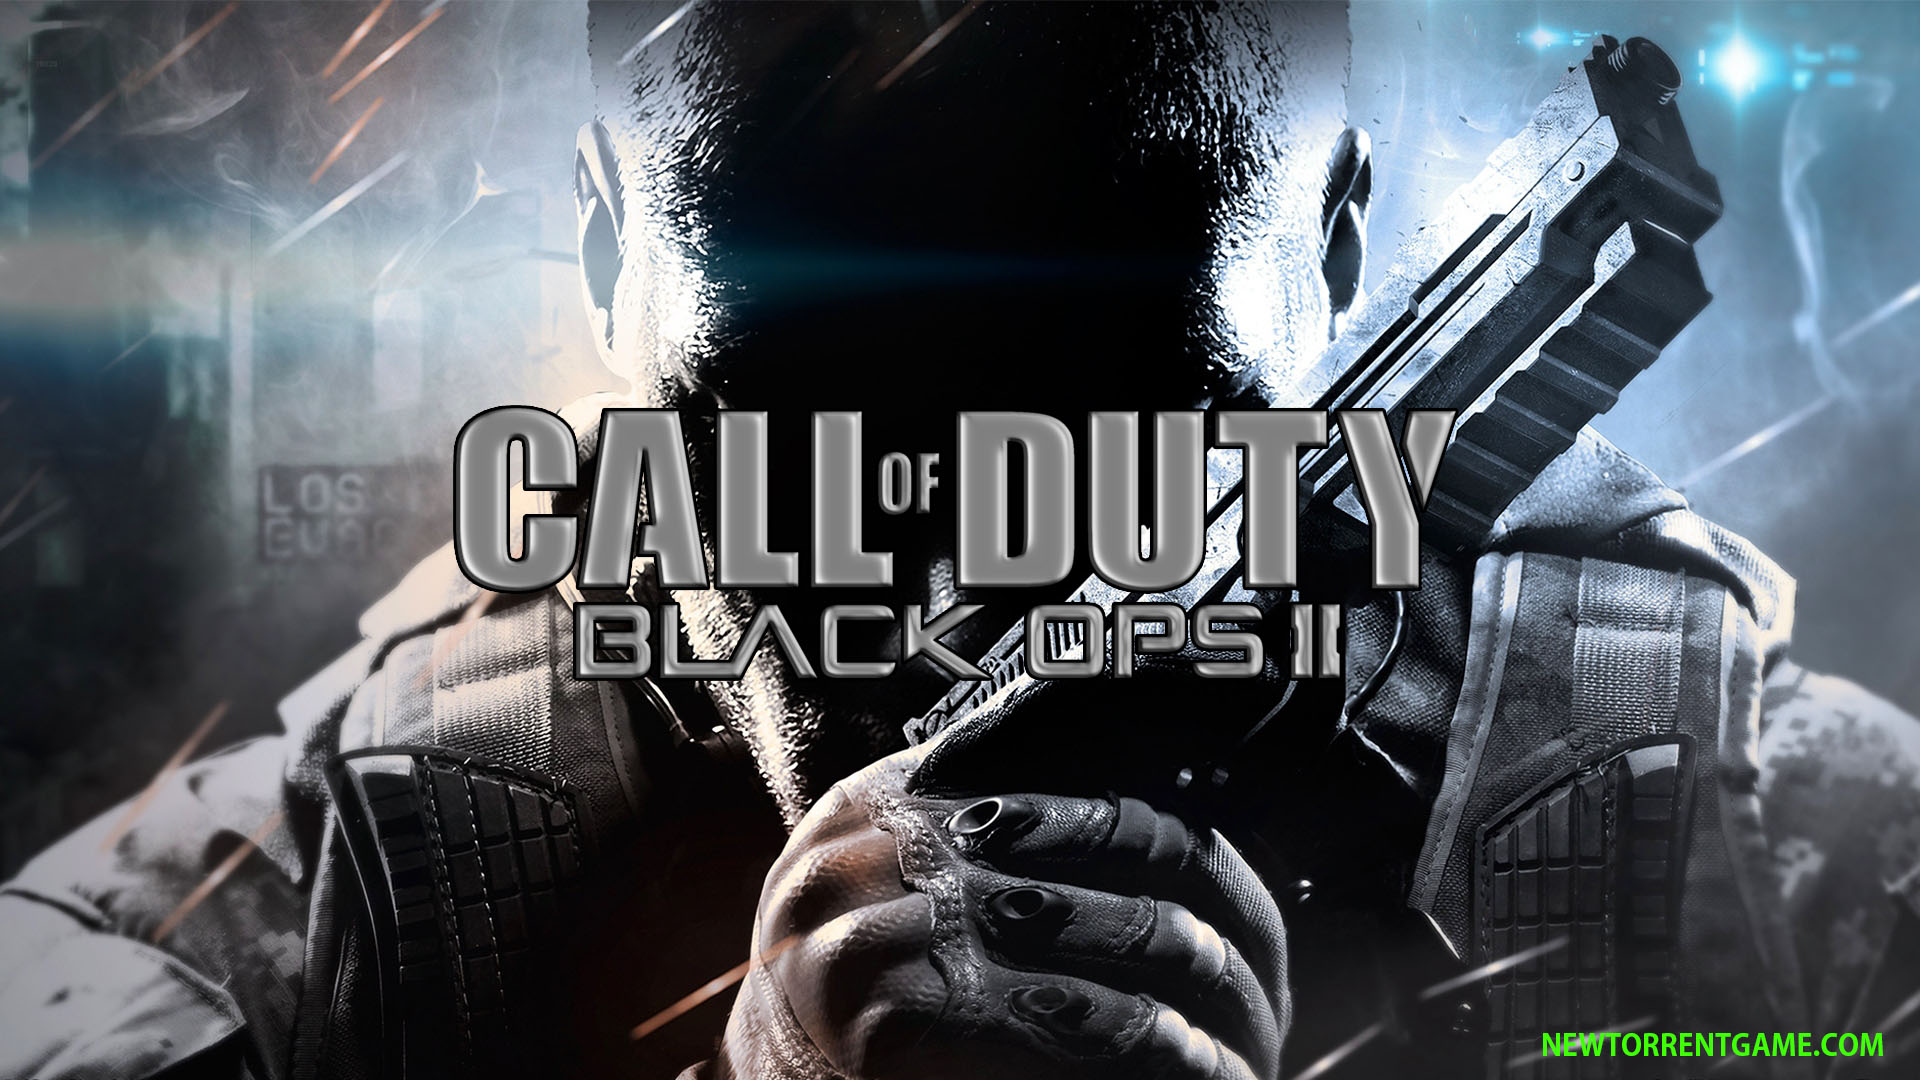 call-of-duty-black-ops-2-torrent-free-download-newtorrentgame